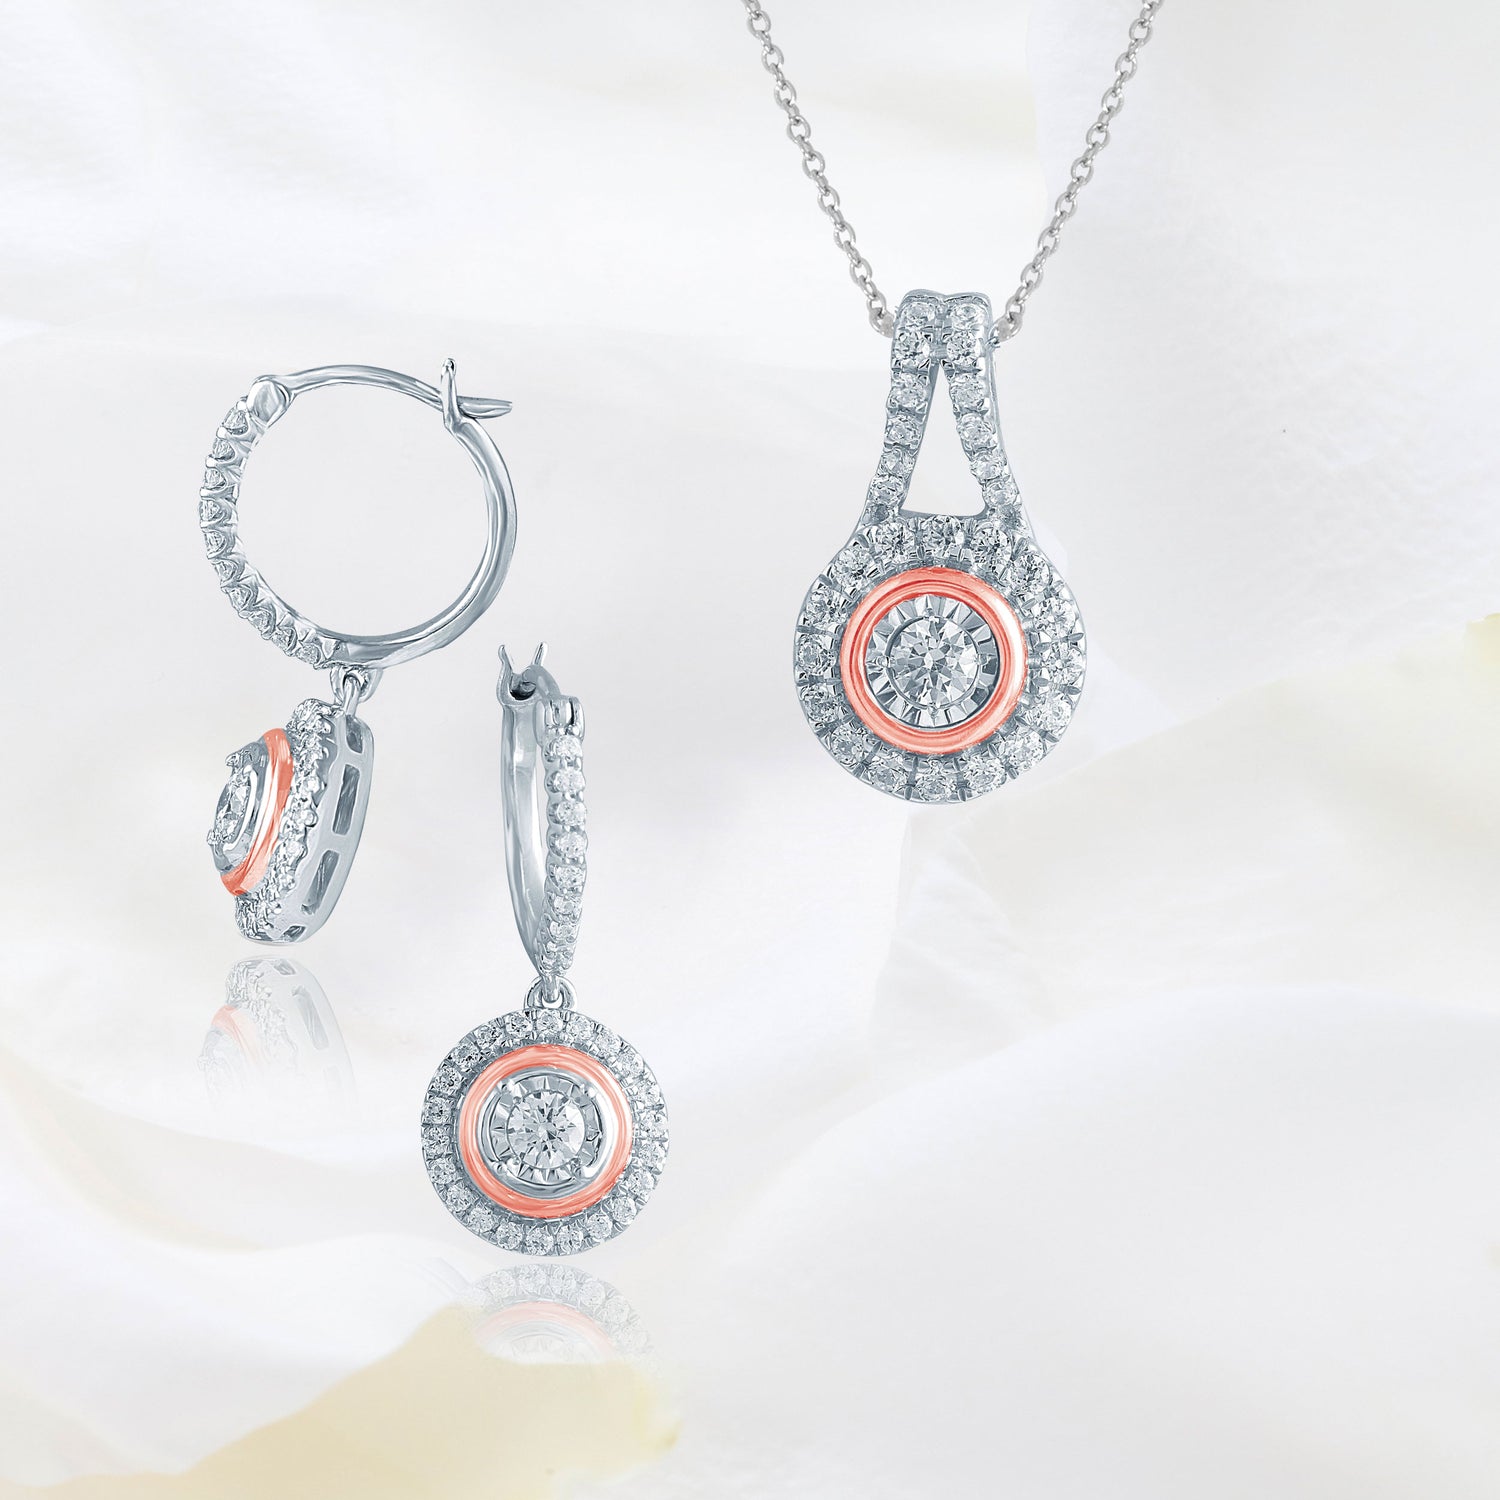 Set of 2 3/4CT TW Diamond Round Halo Fashion Pendant & Earrings in Sterling Silver & 10K Rose gold